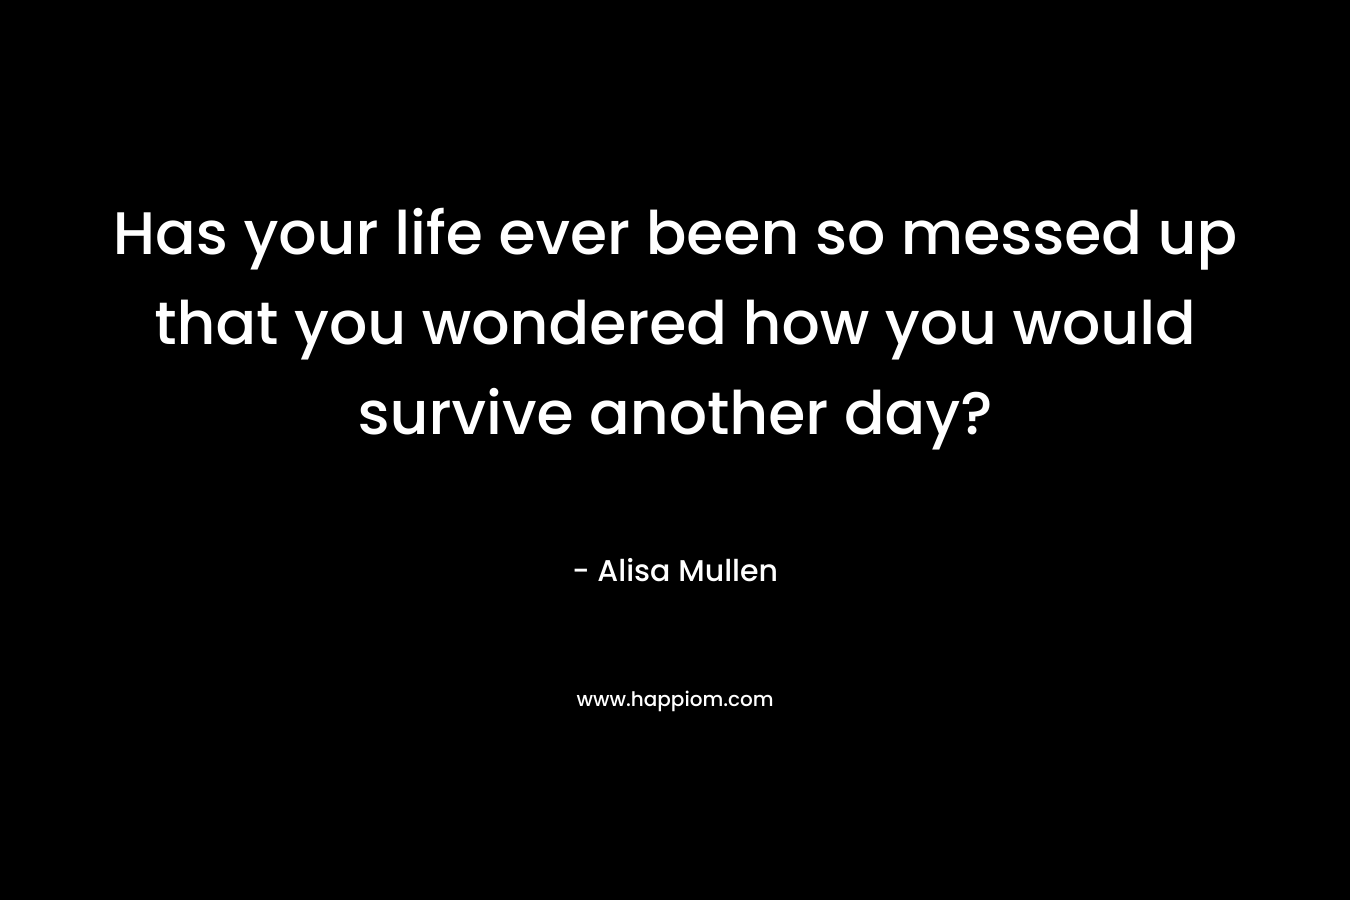 Has your life ever been so messed up that you wondered how you would survive another day?